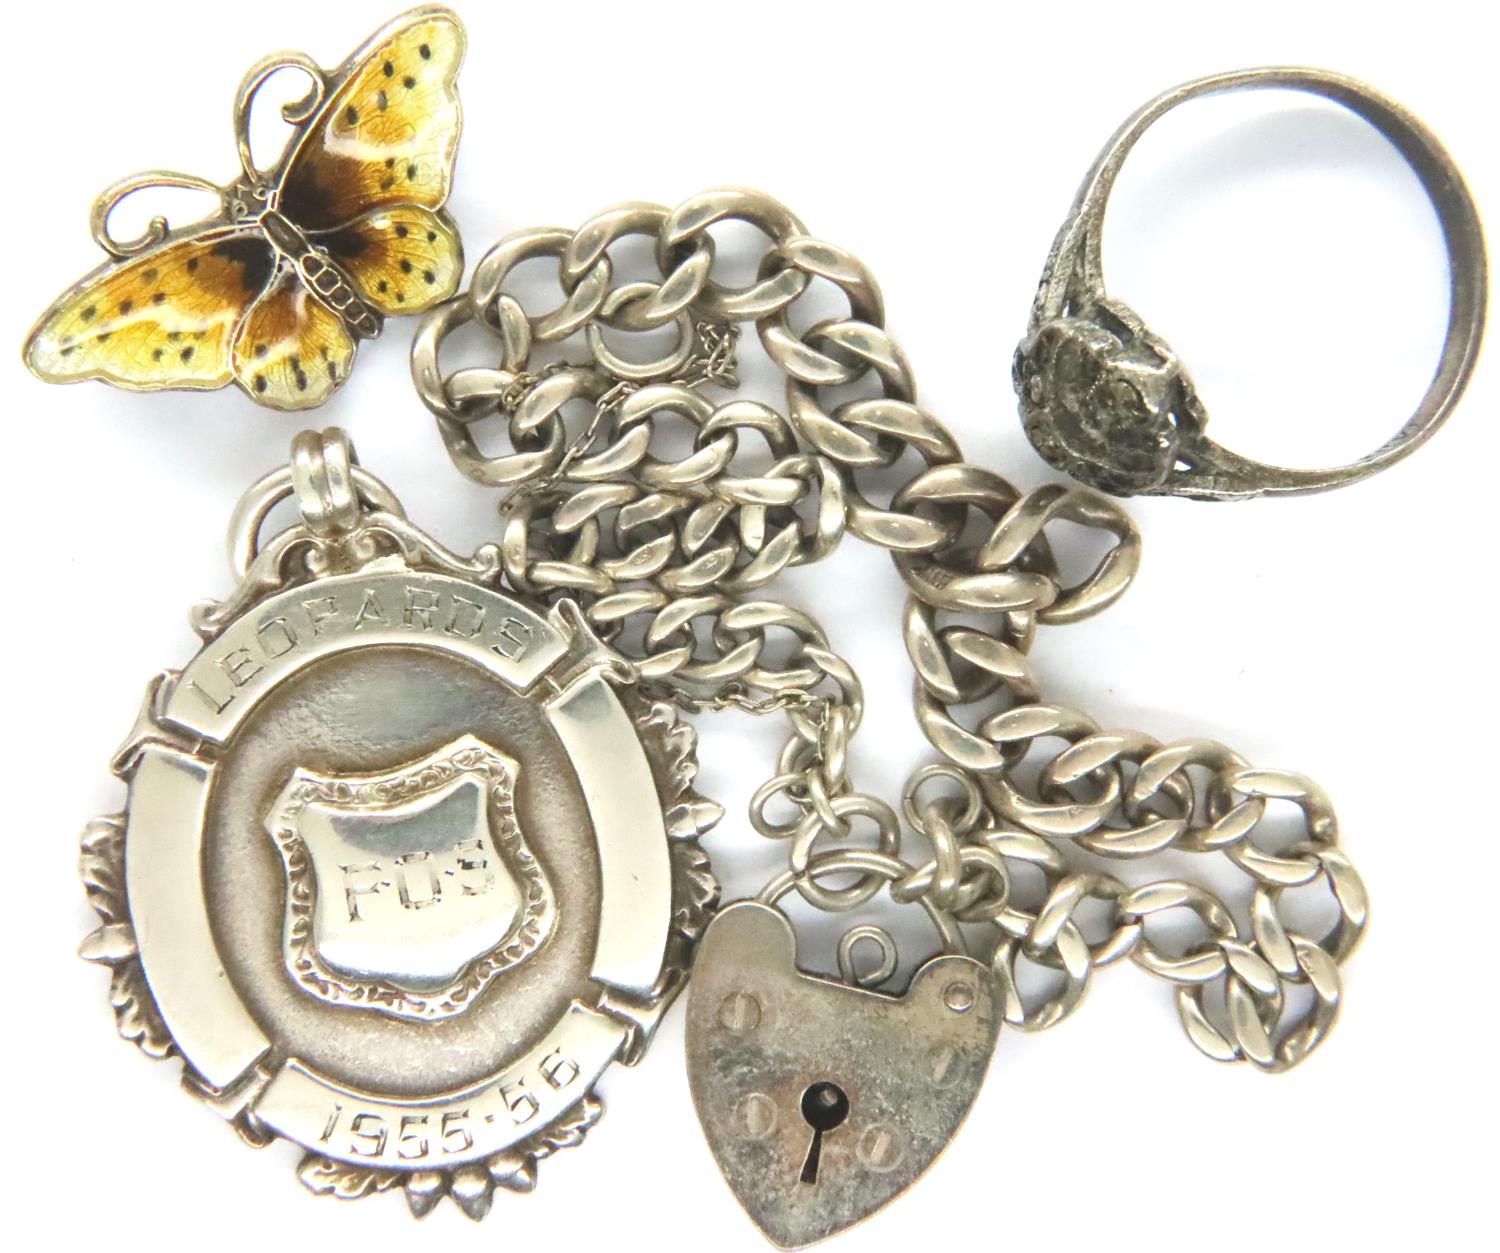 Mixed silver jewellery including bracelet, ring and fob etc., combined 25g. P&P Group 1 (£14+VAT for